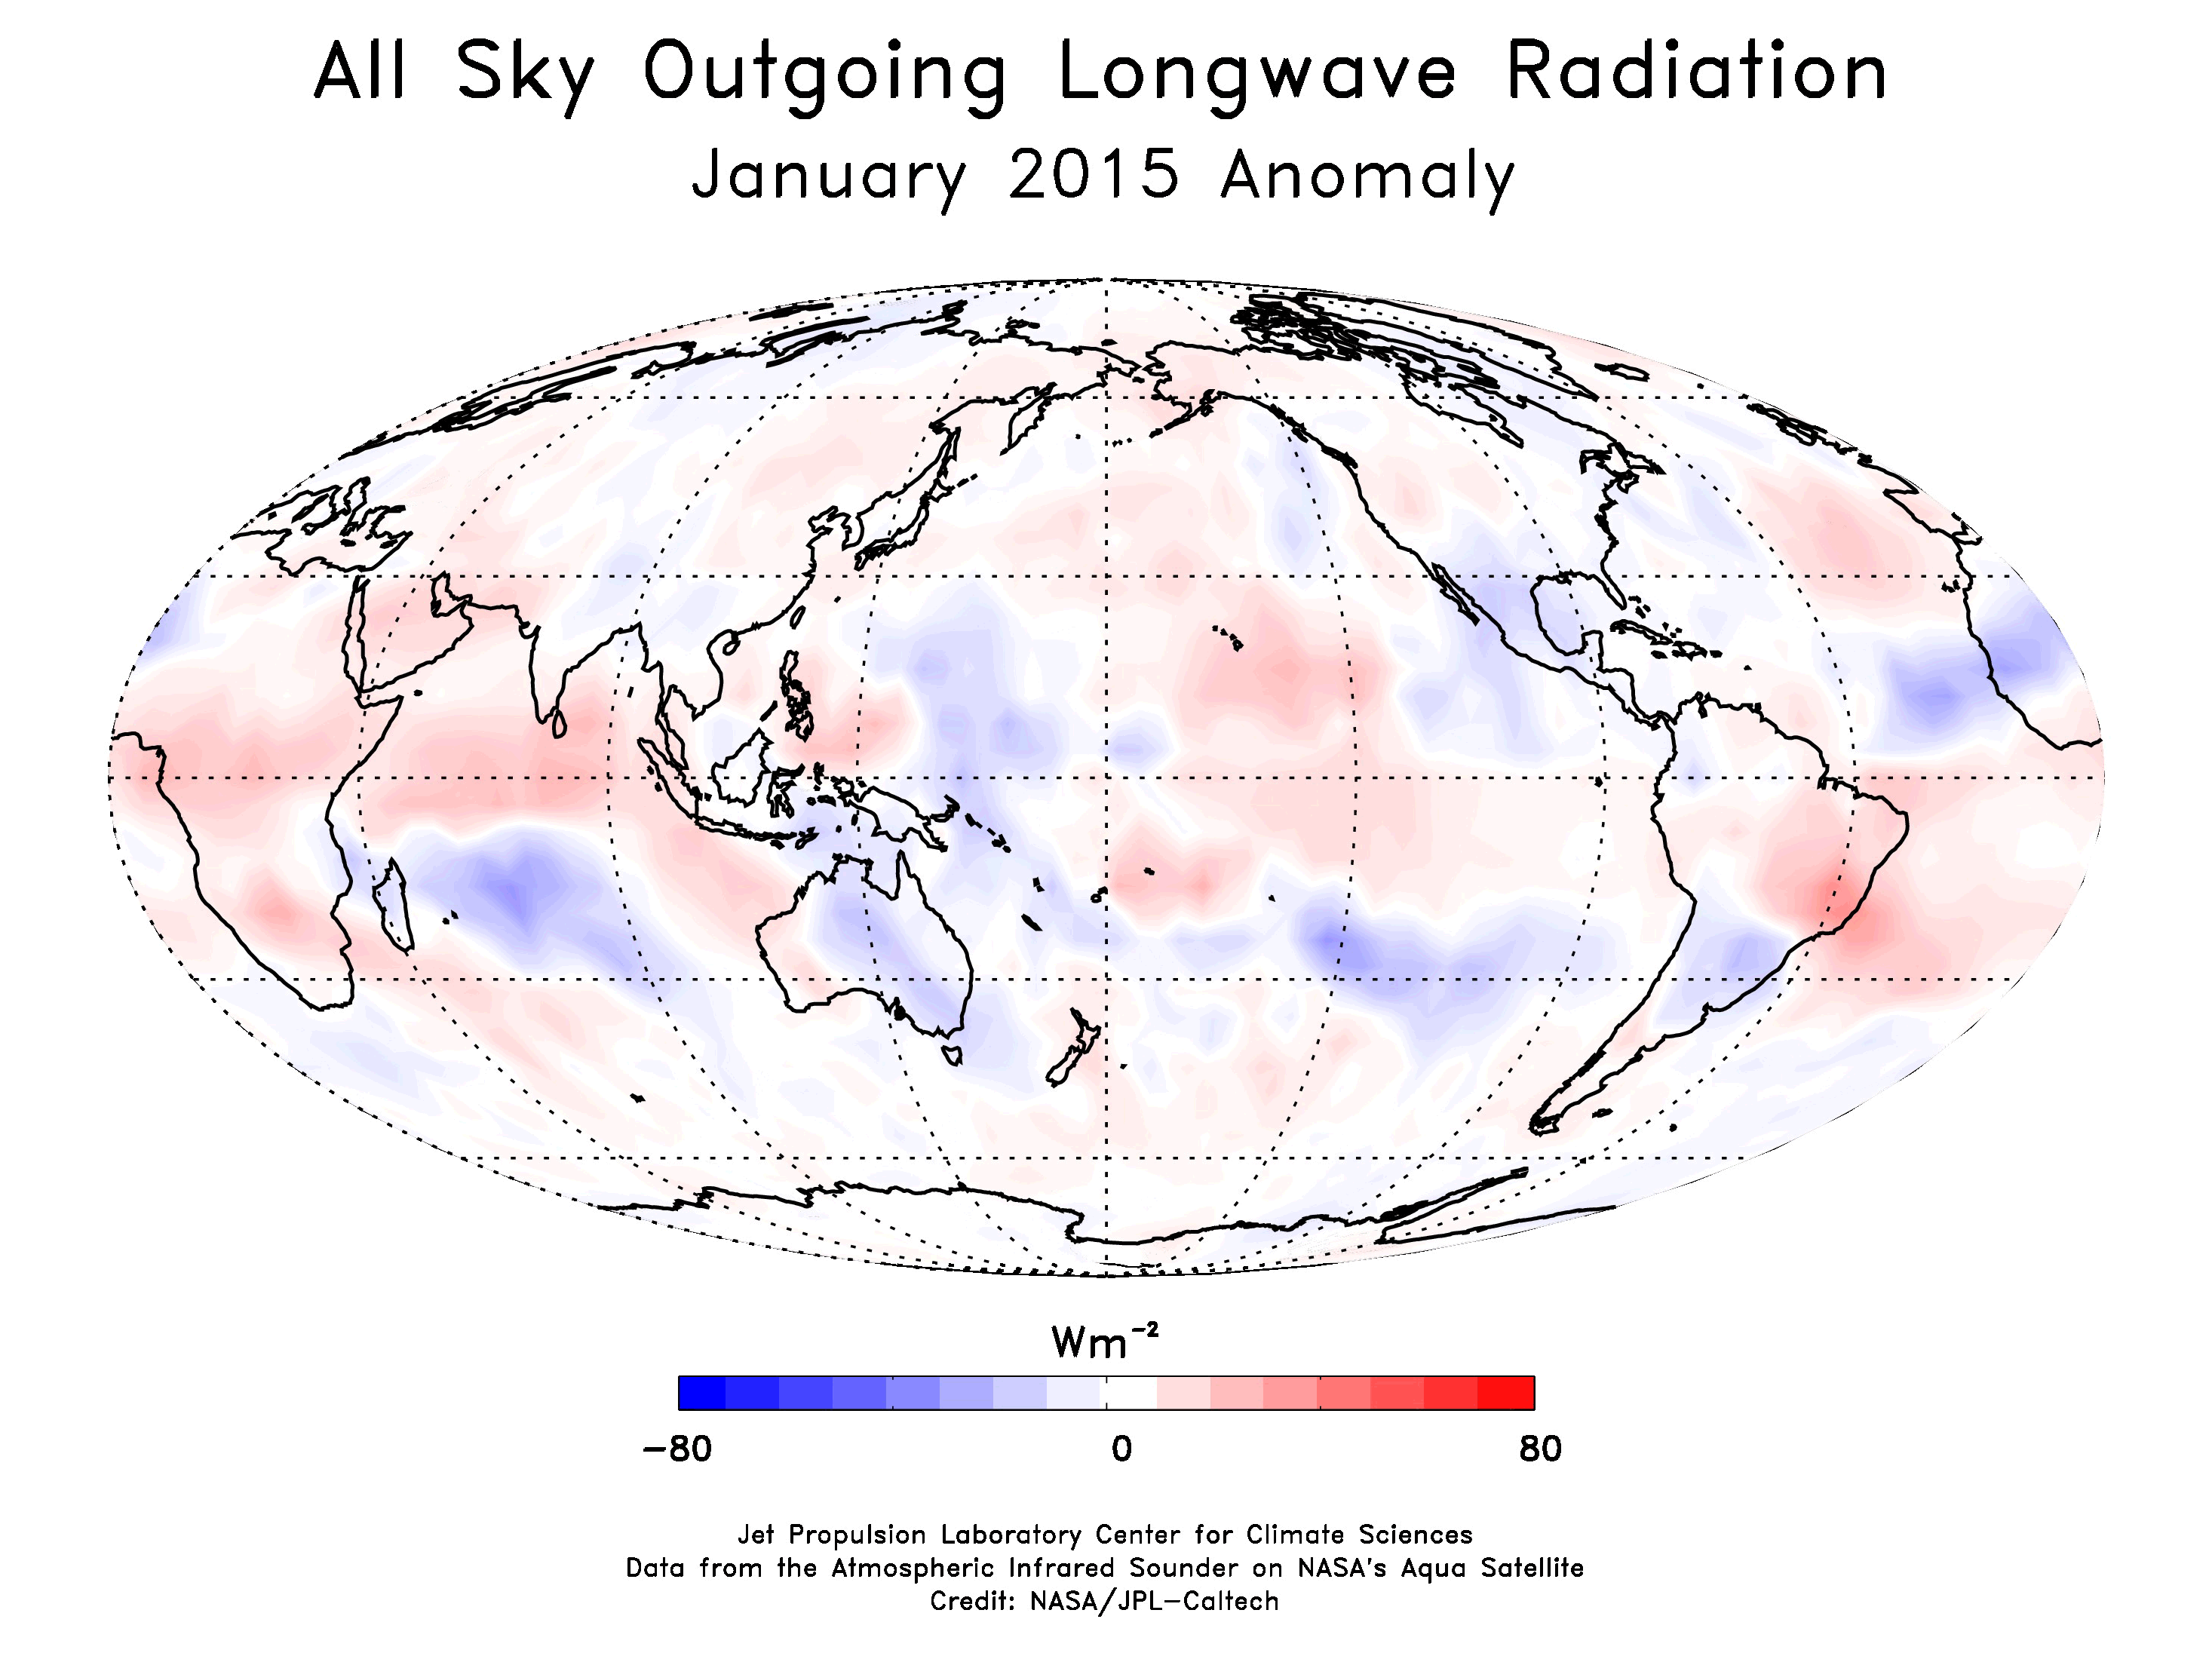 This animation shows the monthly AIRS Outgoing Longwave Radiation anomoly.